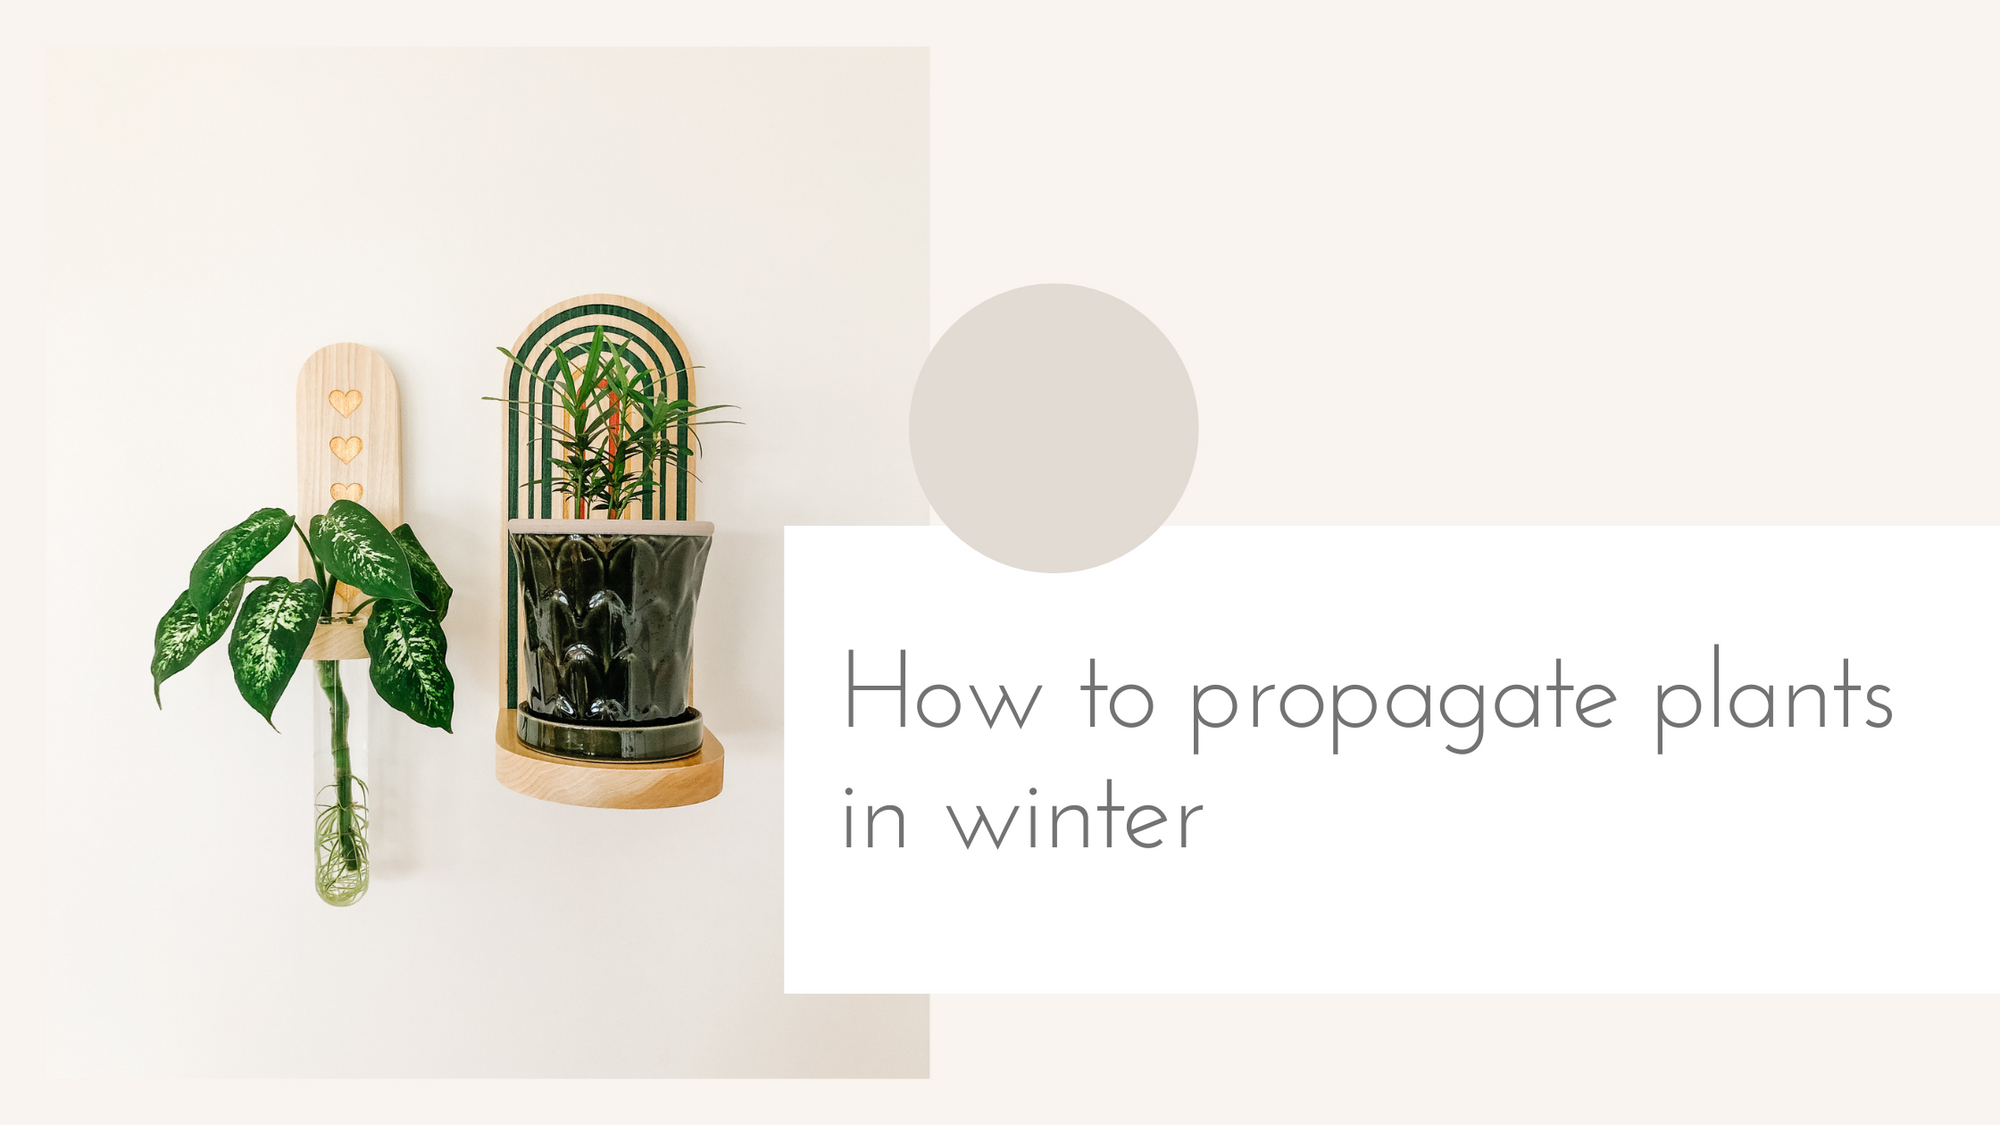 How to propagate plants in winter